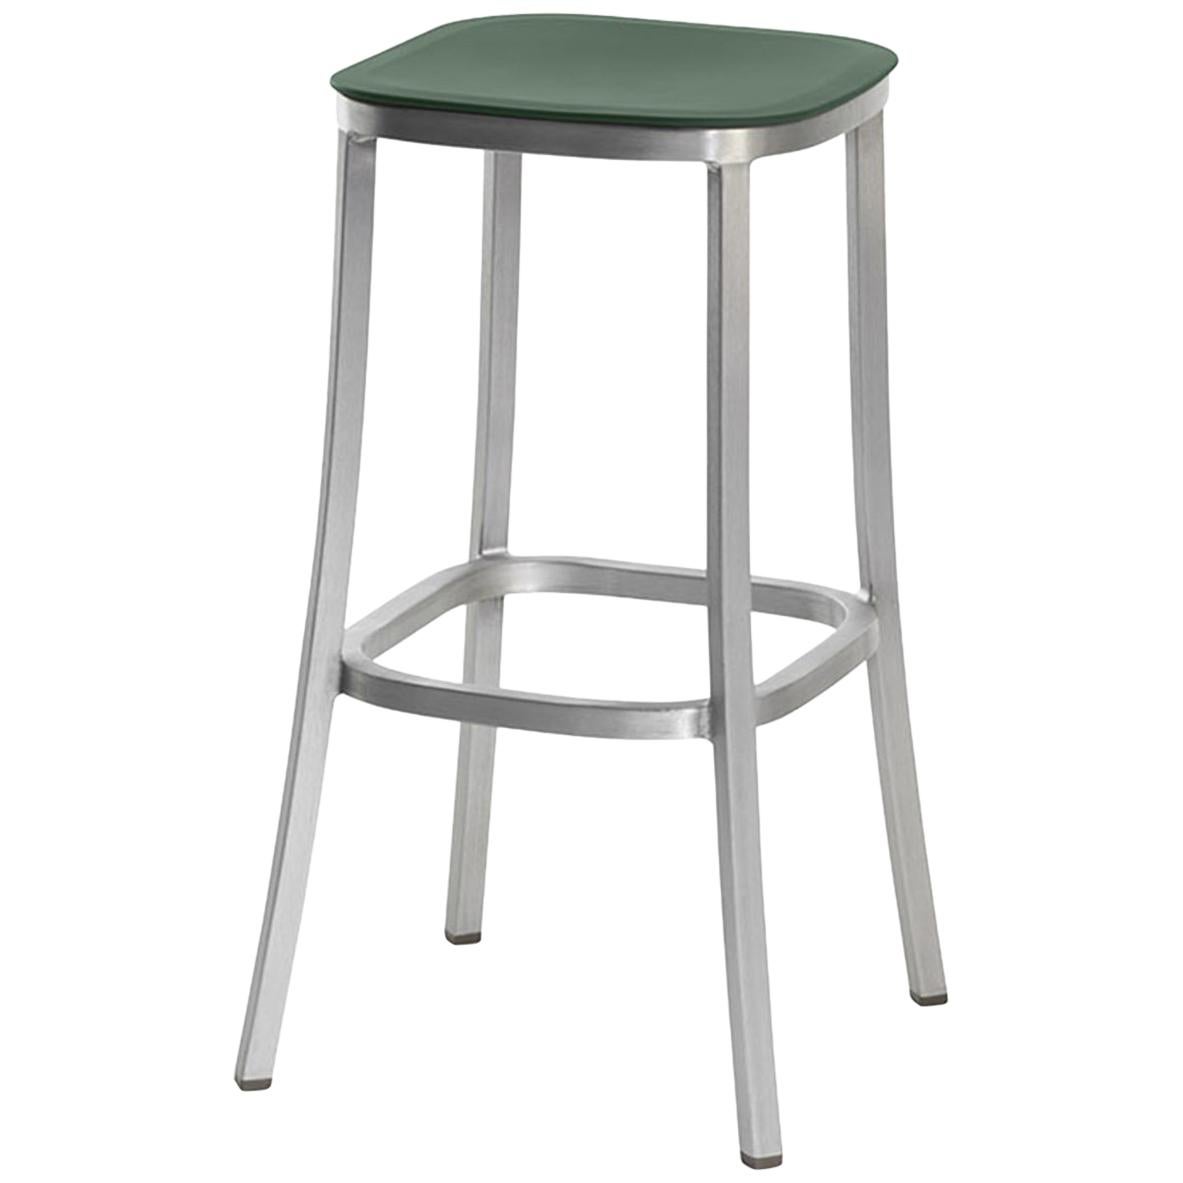 Emeco 1 Inch Barstool in Brushed Aluminum and Green by Jasper Morrison For Sale